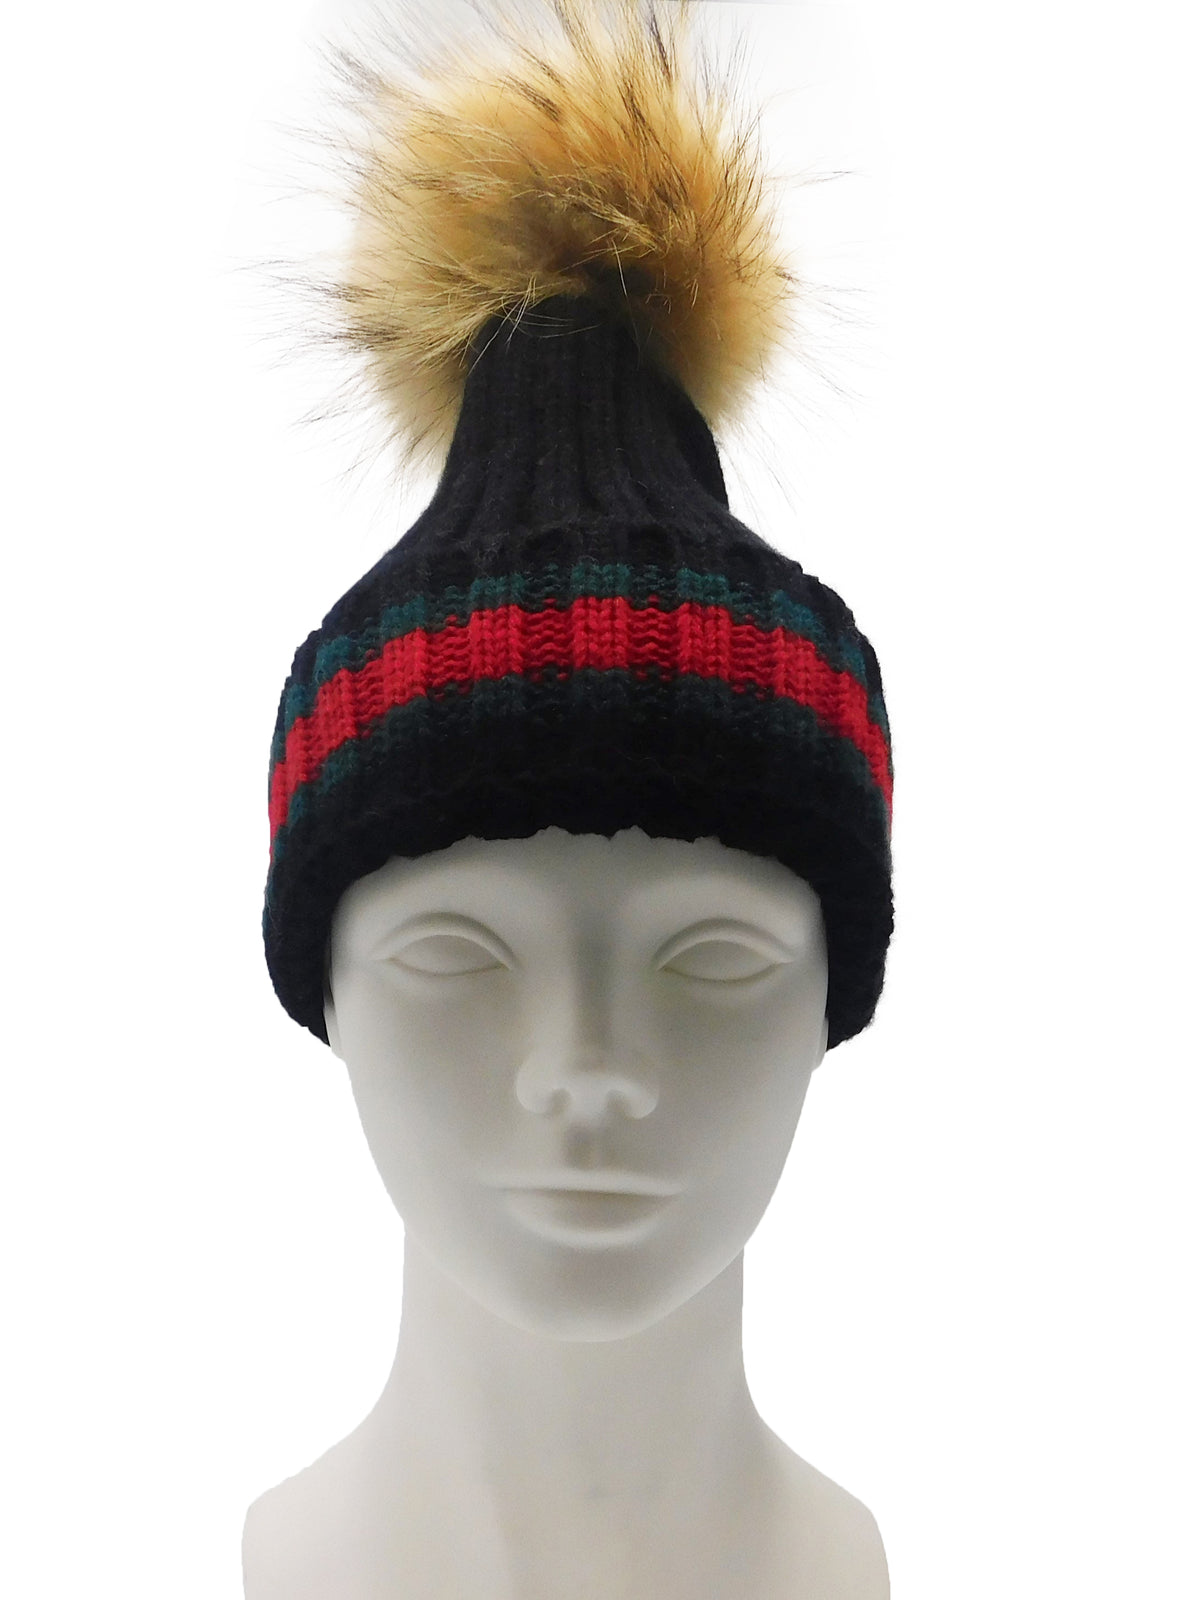 Striped Knitted Beanie with Removable Fur Pom - paulamariecollection